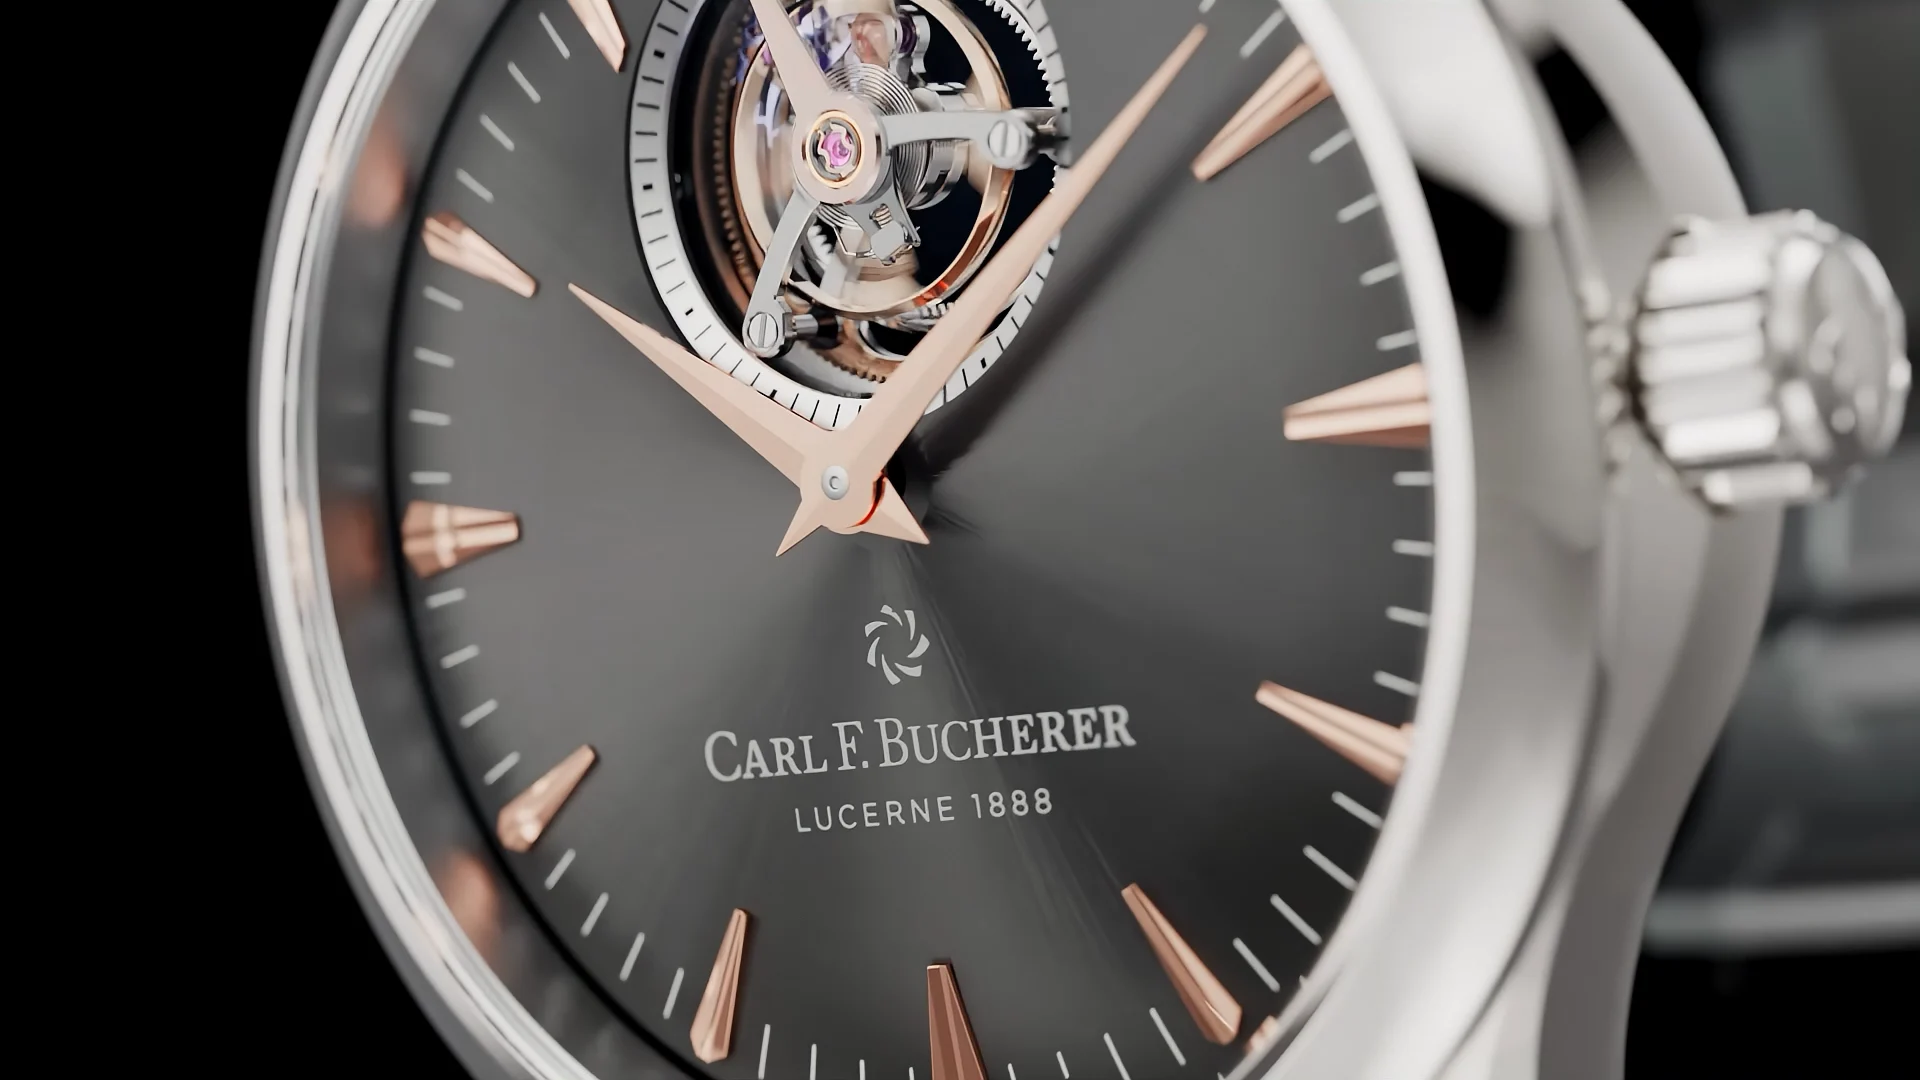 we se the front of a silver, black and bronze colored Carl F. Bucherer Watch with a turbillon